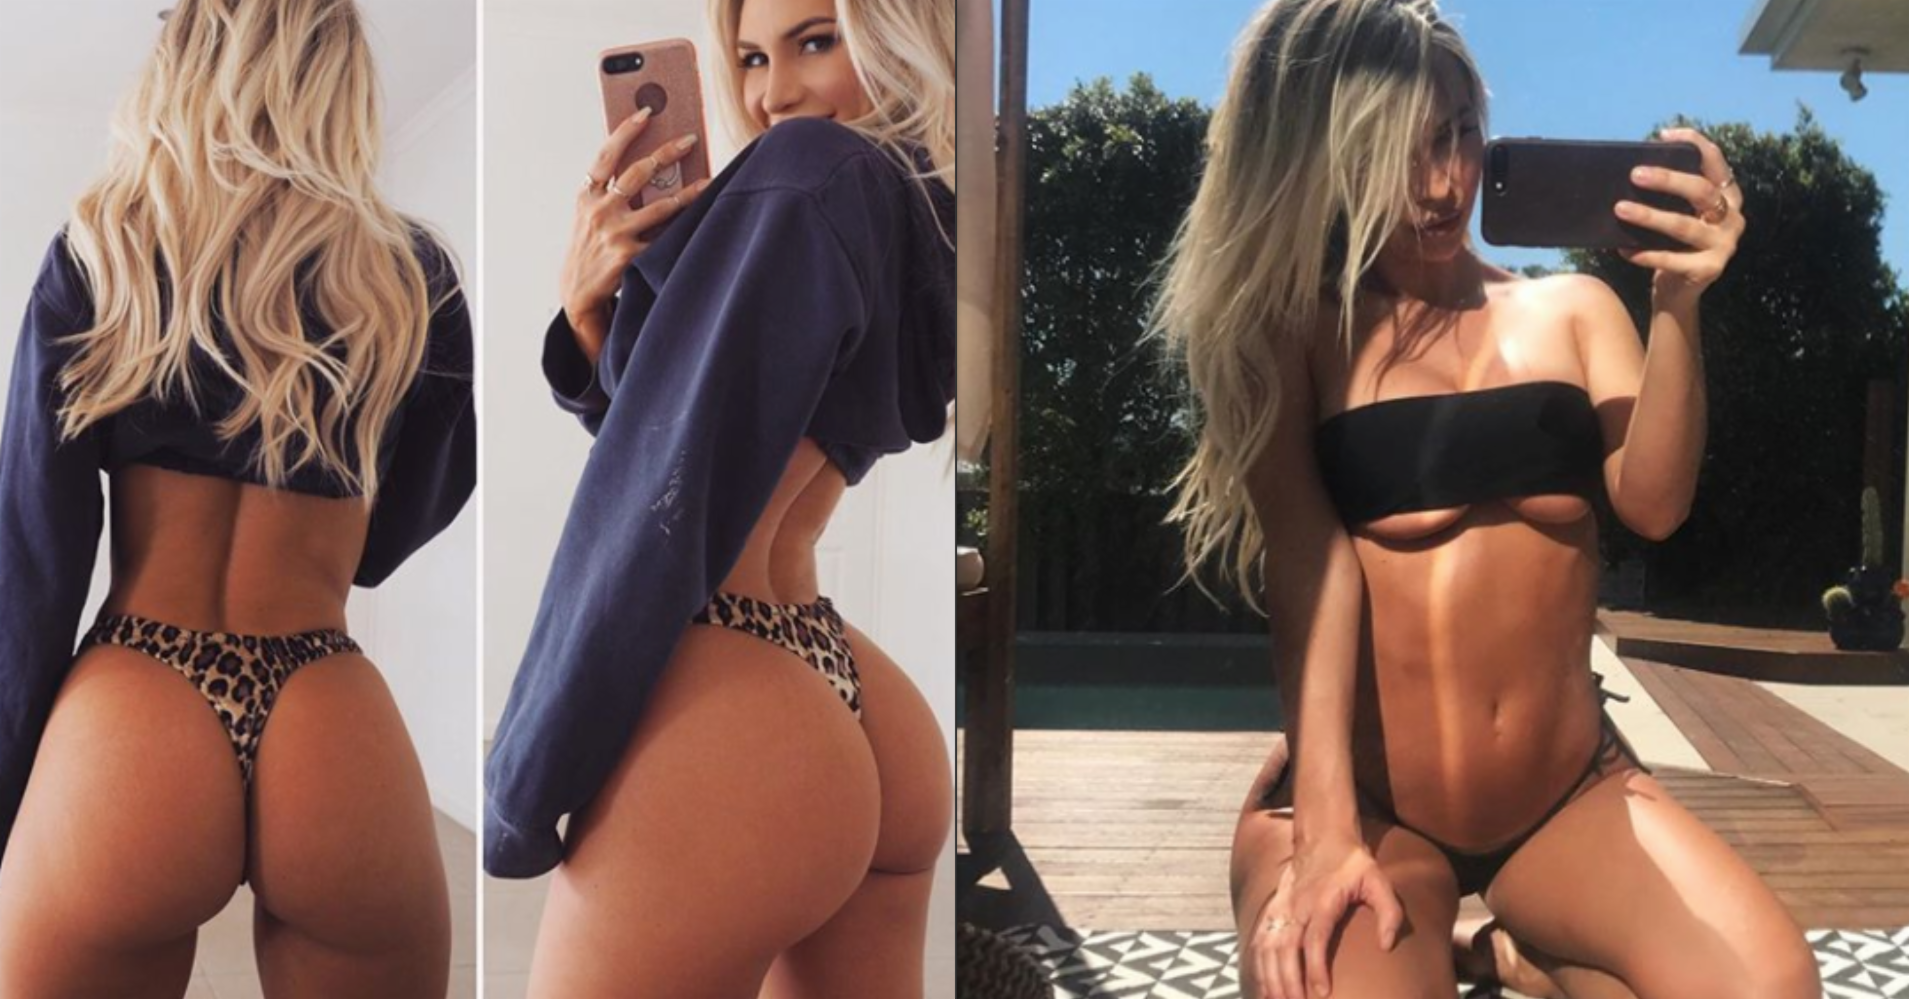 Meet The Bombshell Model Whos Sharing Hot Pics Of Her Fitness Booty 